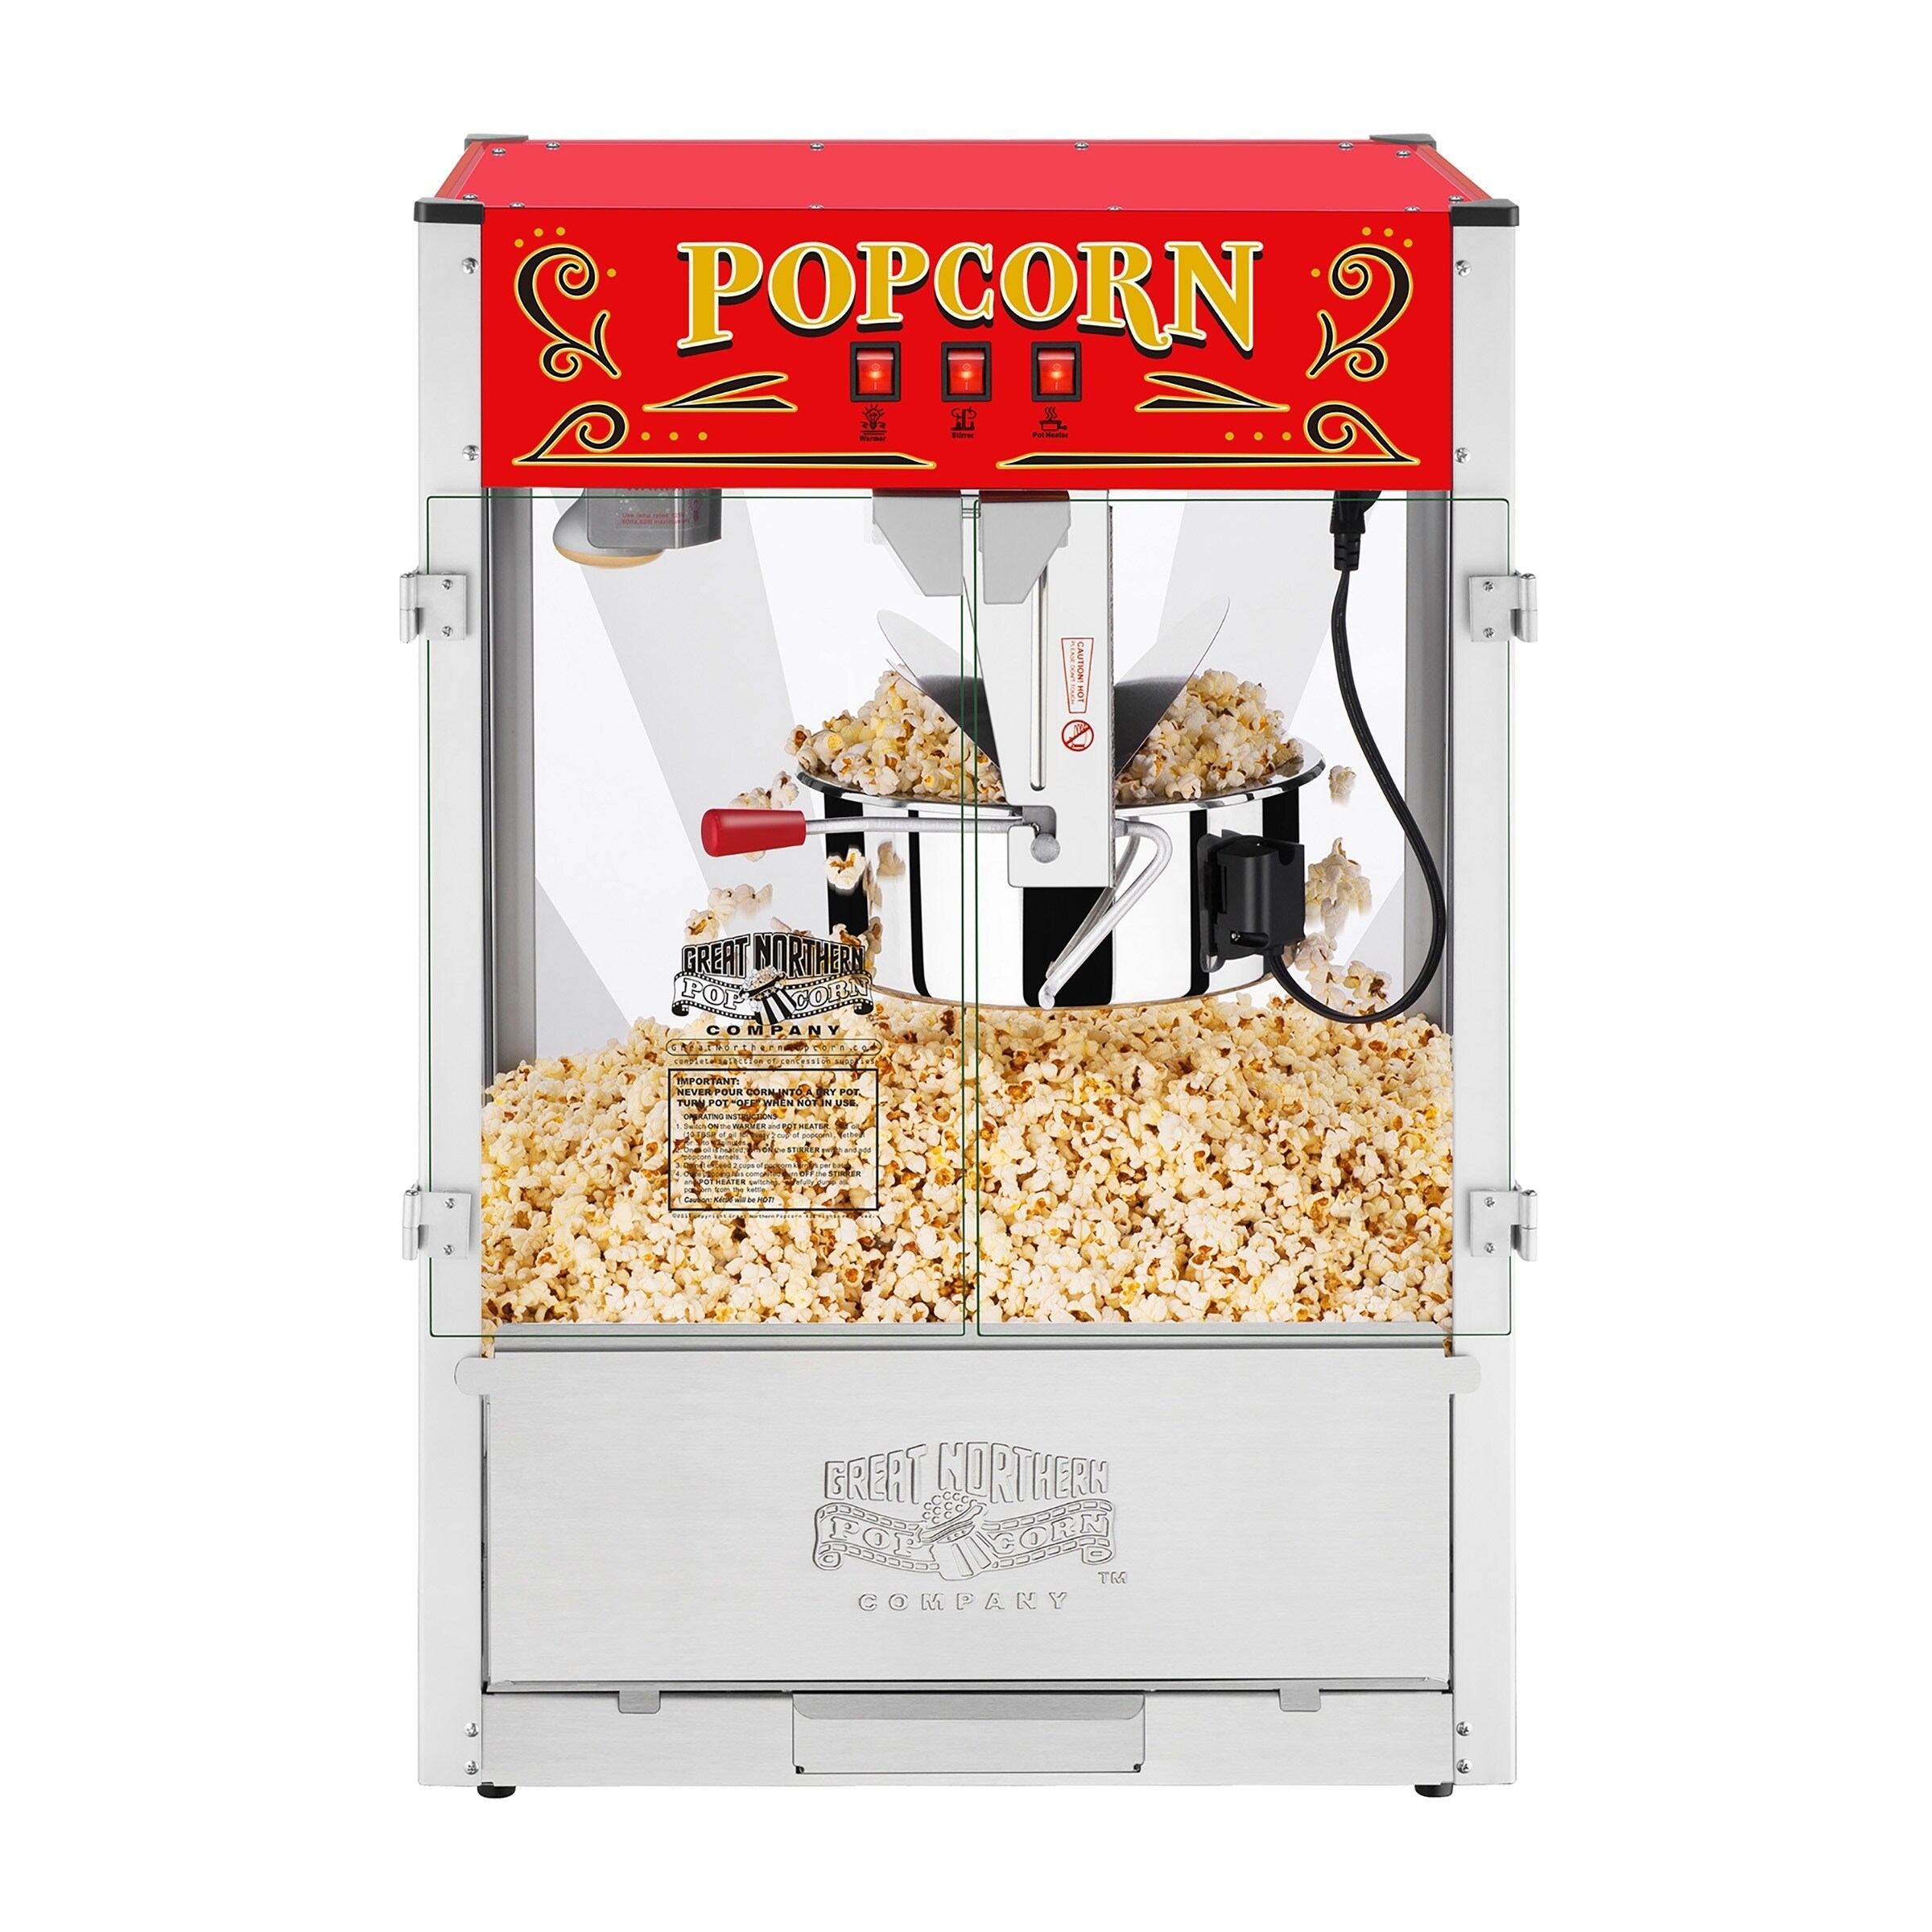  Great Northern Popcorn Company Little Bambino Popcorn Machines,  Modern Gray, Red: Electric Popcorn Poppers: Home & Kitchen